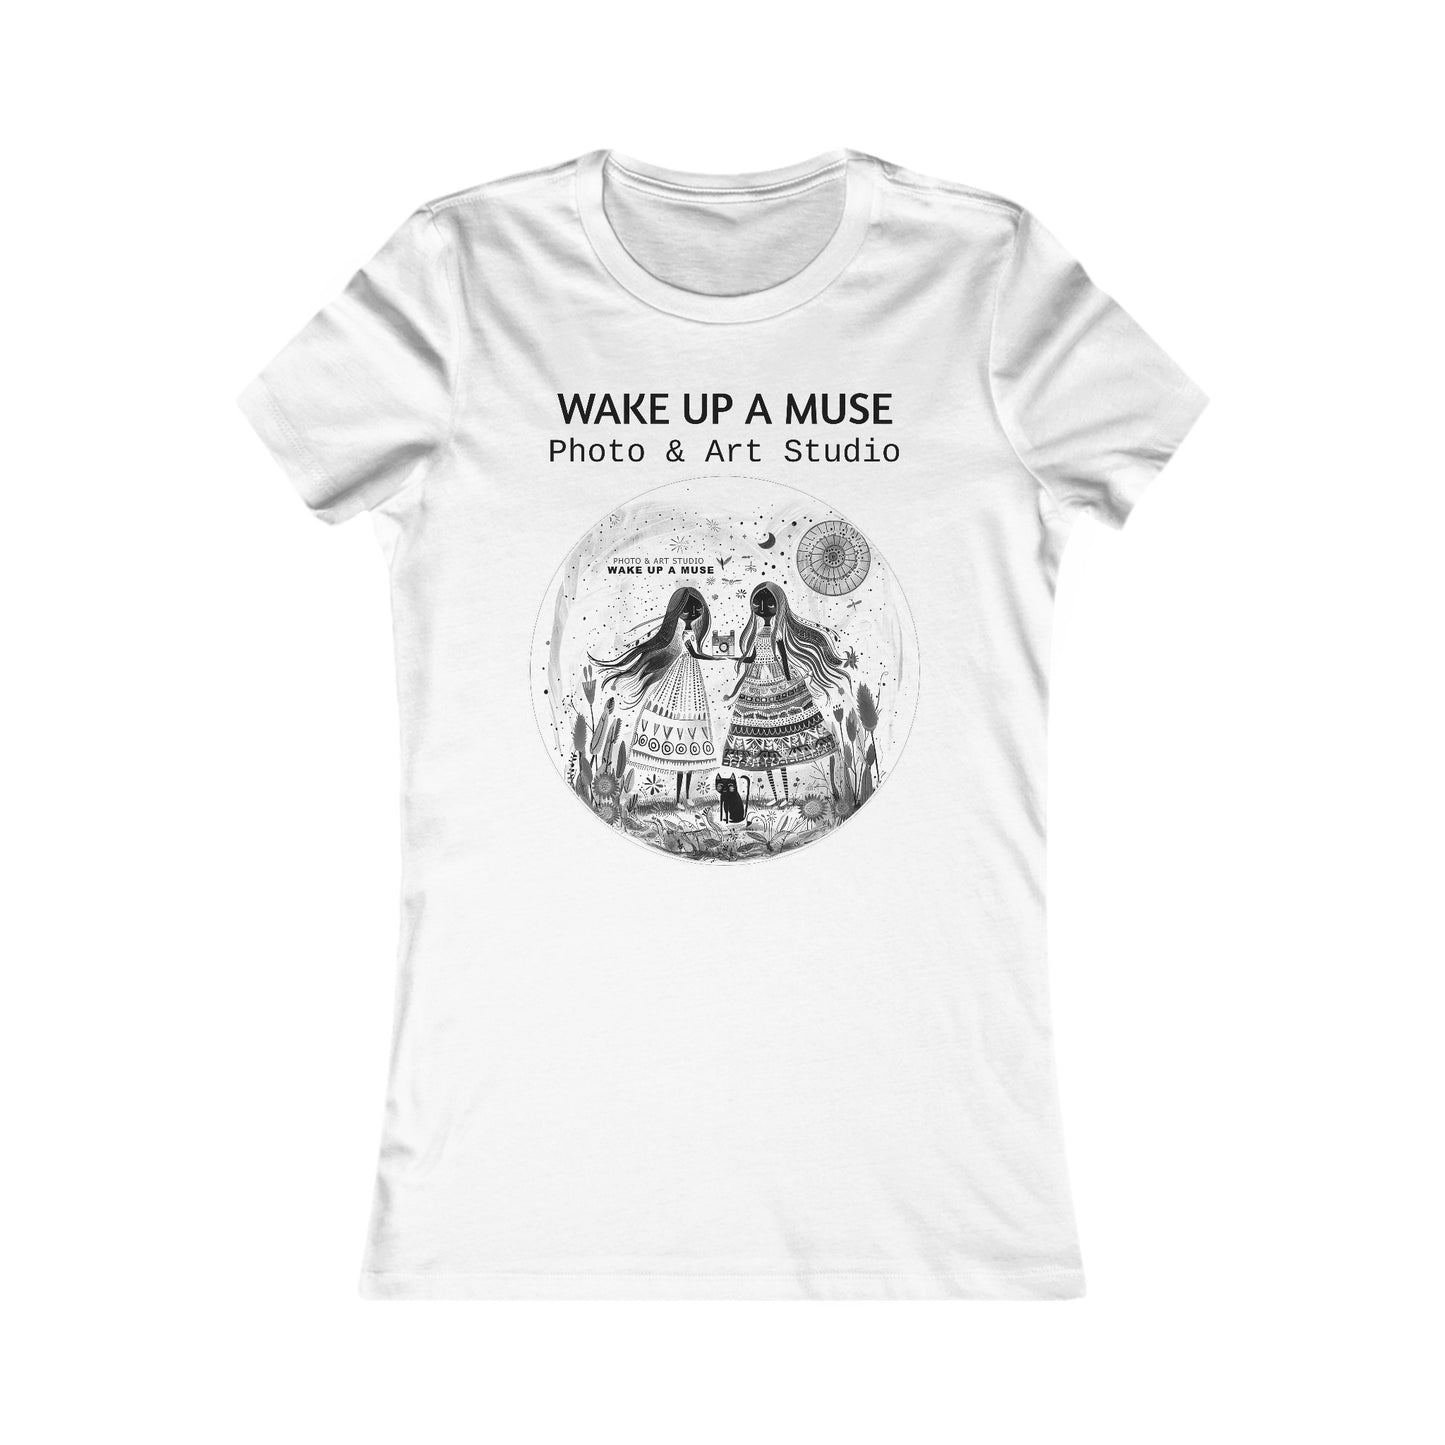 Women's  "WAKE UP A MUSE" Slim Fit White&Black White Tee